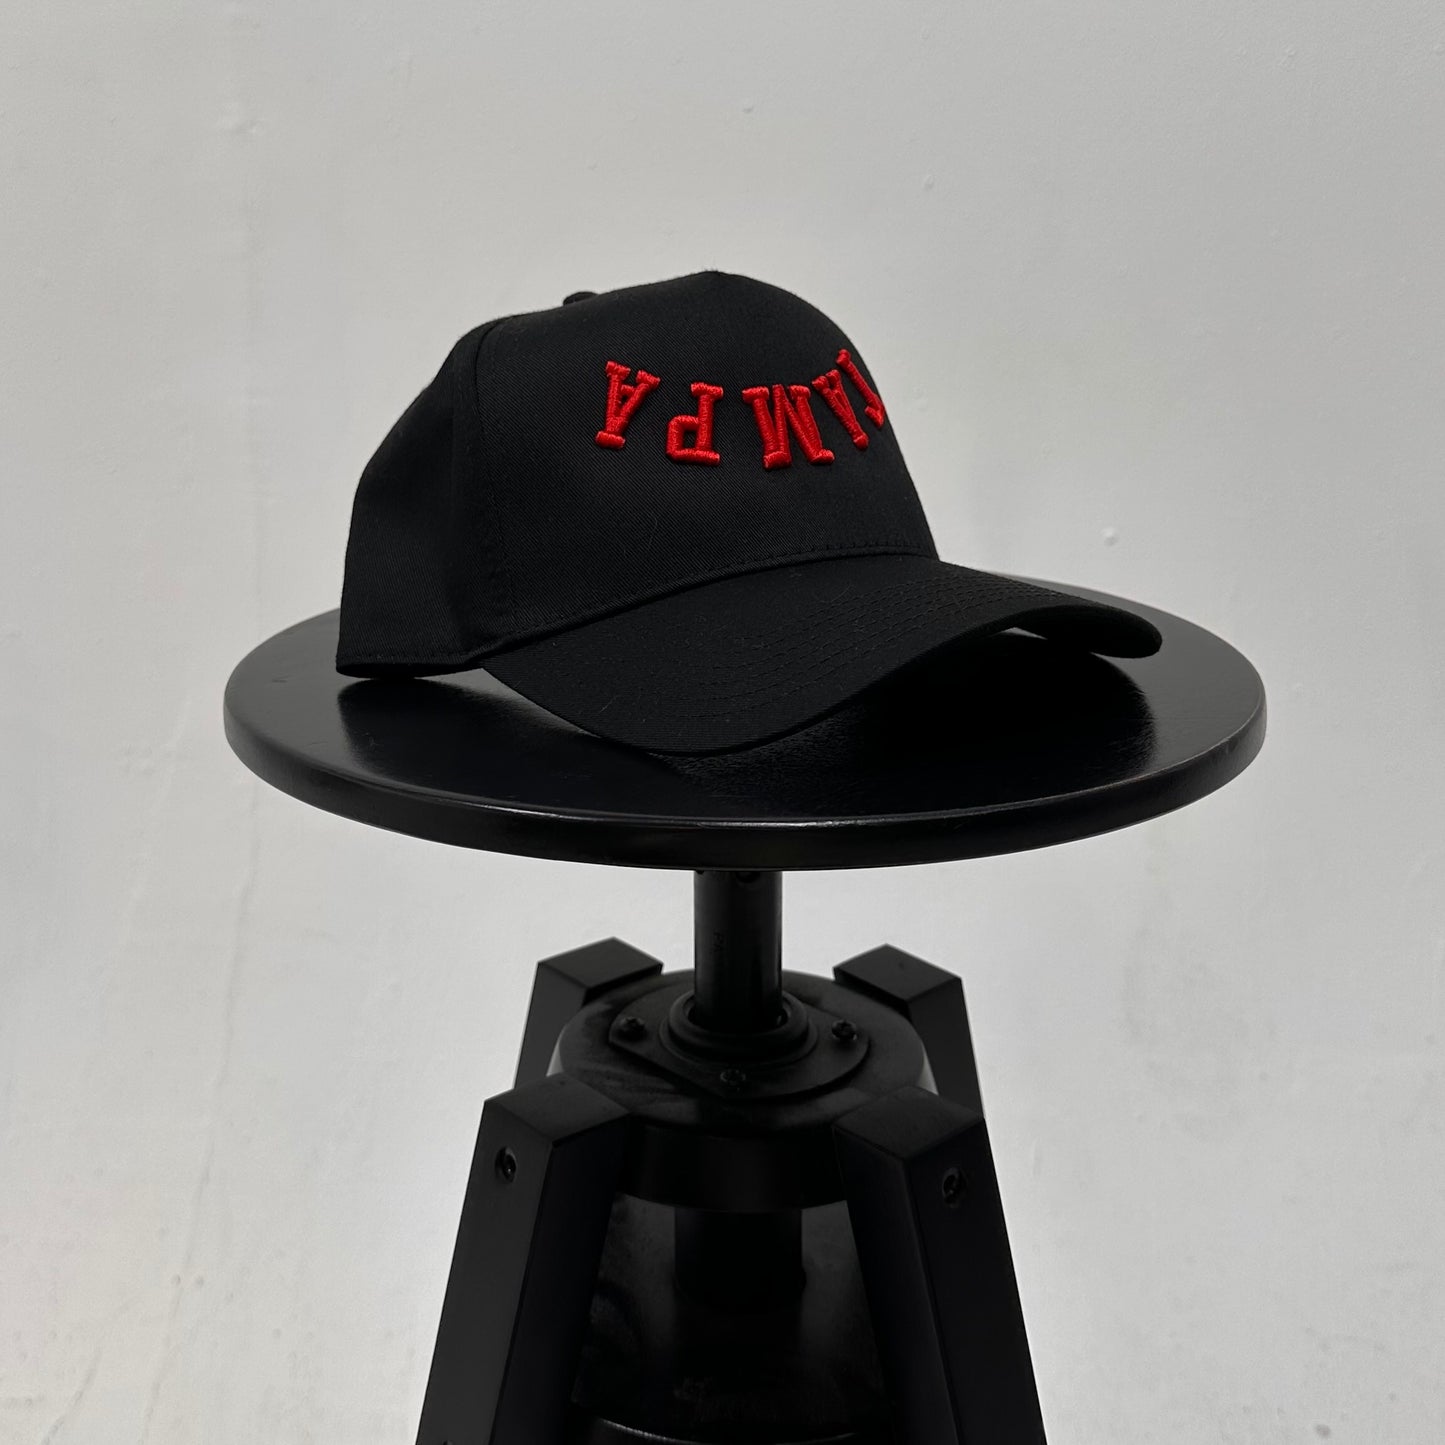 The Tampa Hat - Black/Red